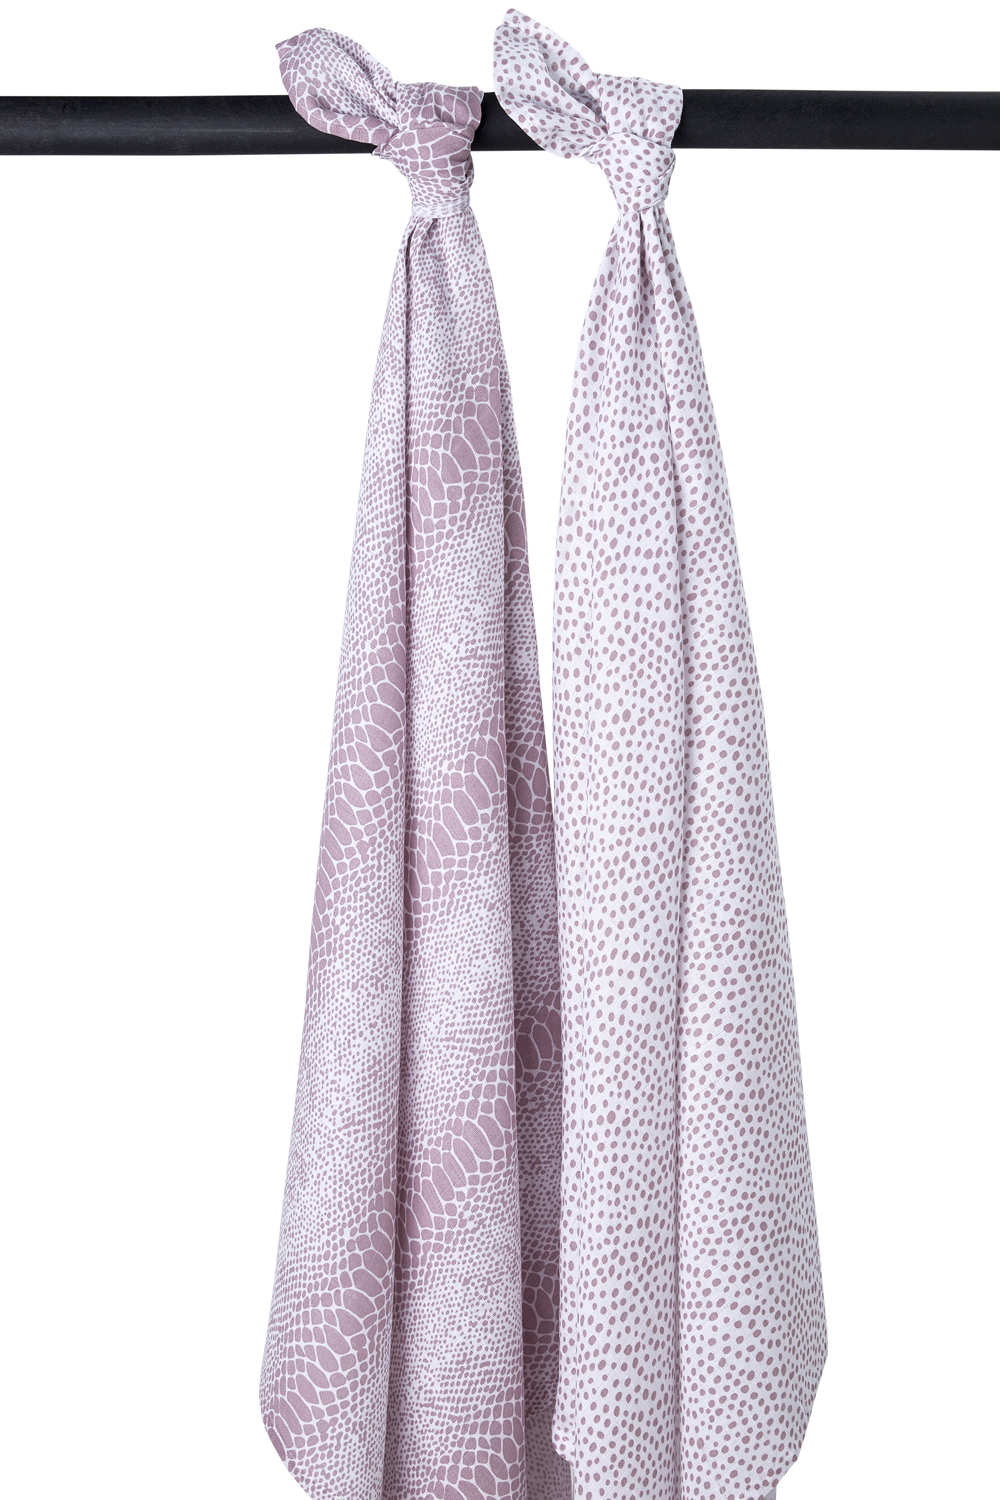 Swaddle  2er pack musselin Cheetah/Snake - lilac - 120x120cm